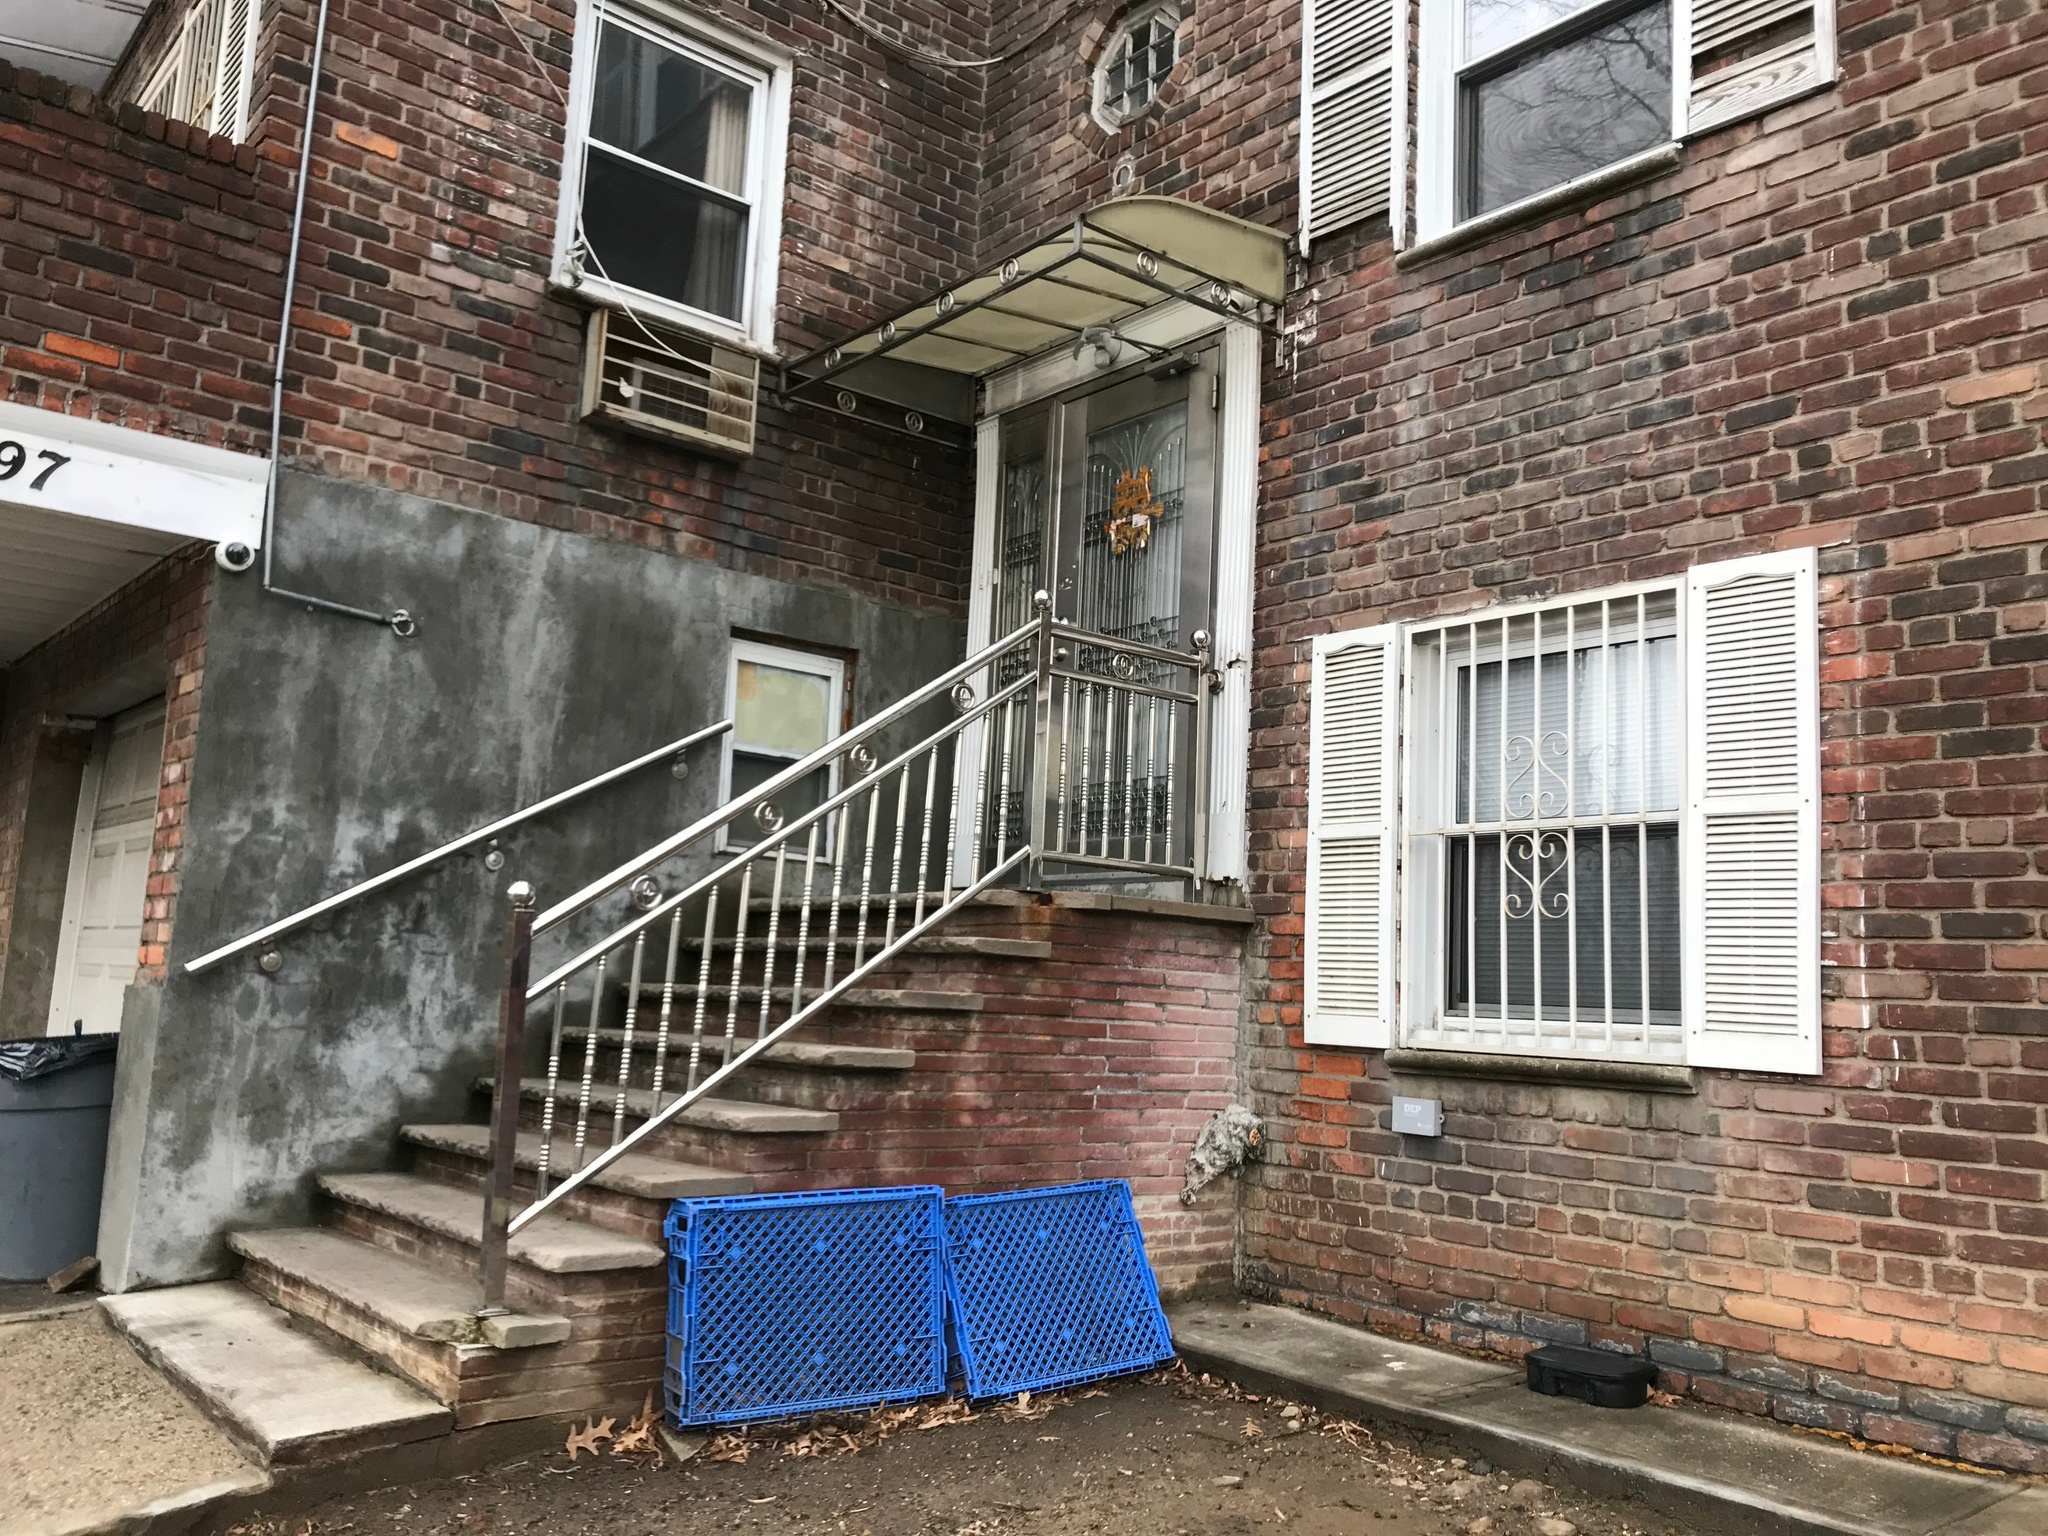 A stairway leading to a door of a house in a corner formed by two brick buildings. The door is made of steel, with a glass and metal awning above it, and a steel railing lining the side of the stairway. Against the stairway, two blue plastic containers are propped against the brick. 